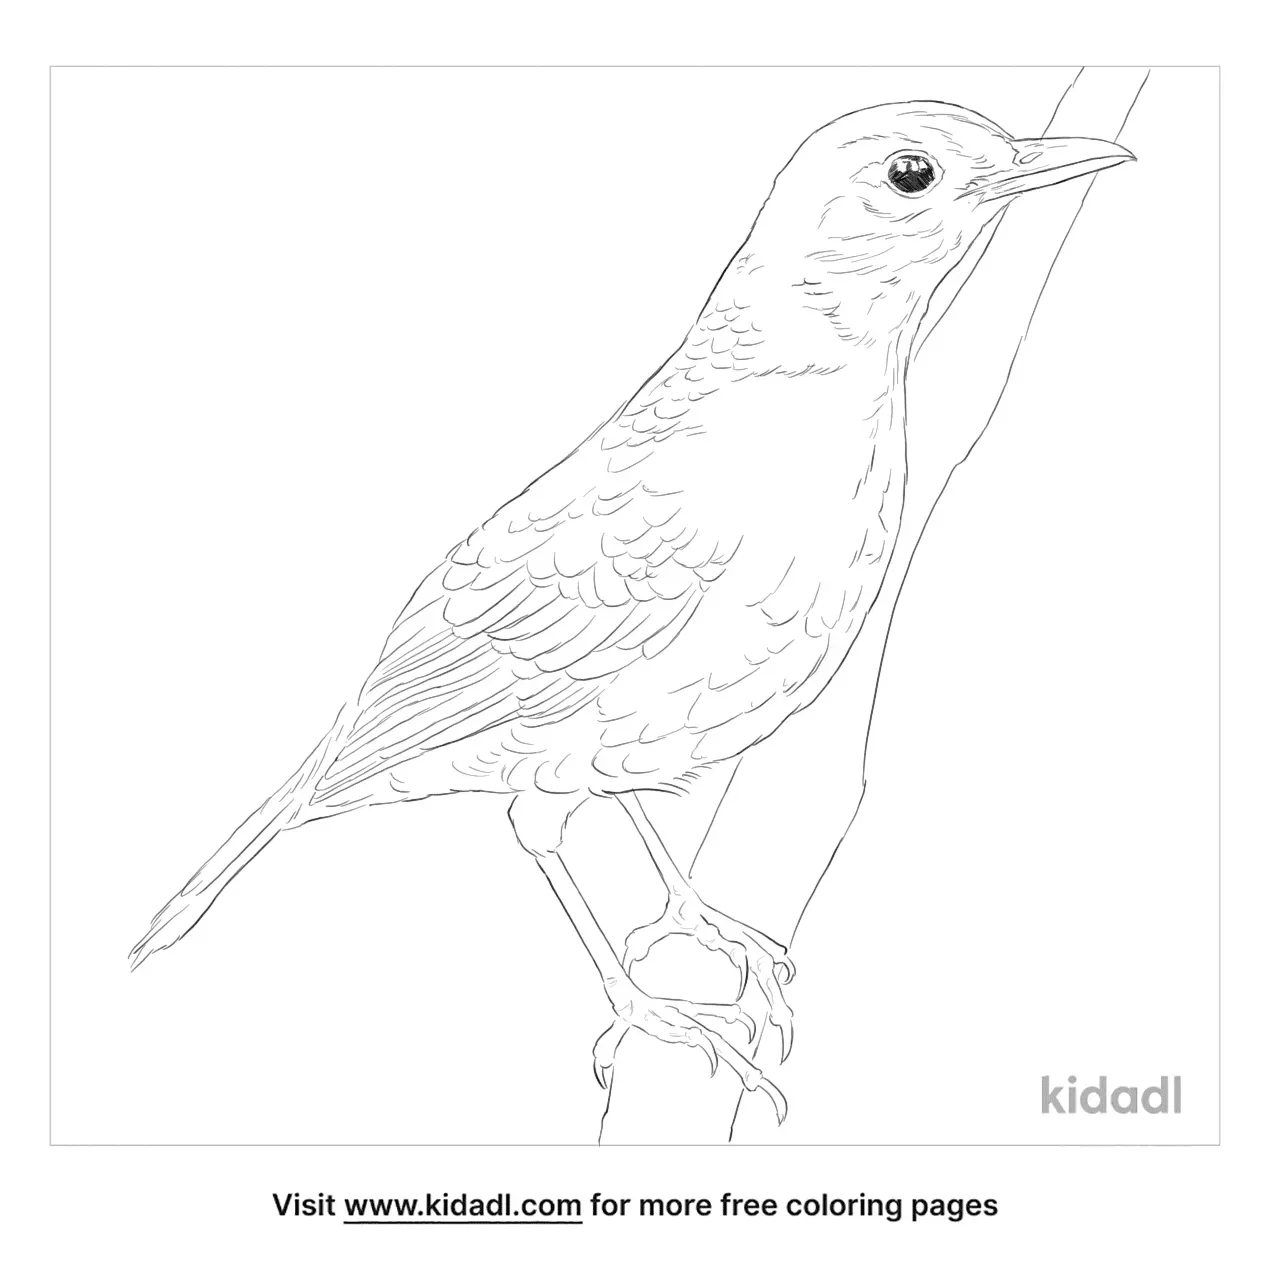 Mourning Collared Dove Coloring Page | Free Birds Coloring Page | Kidadl